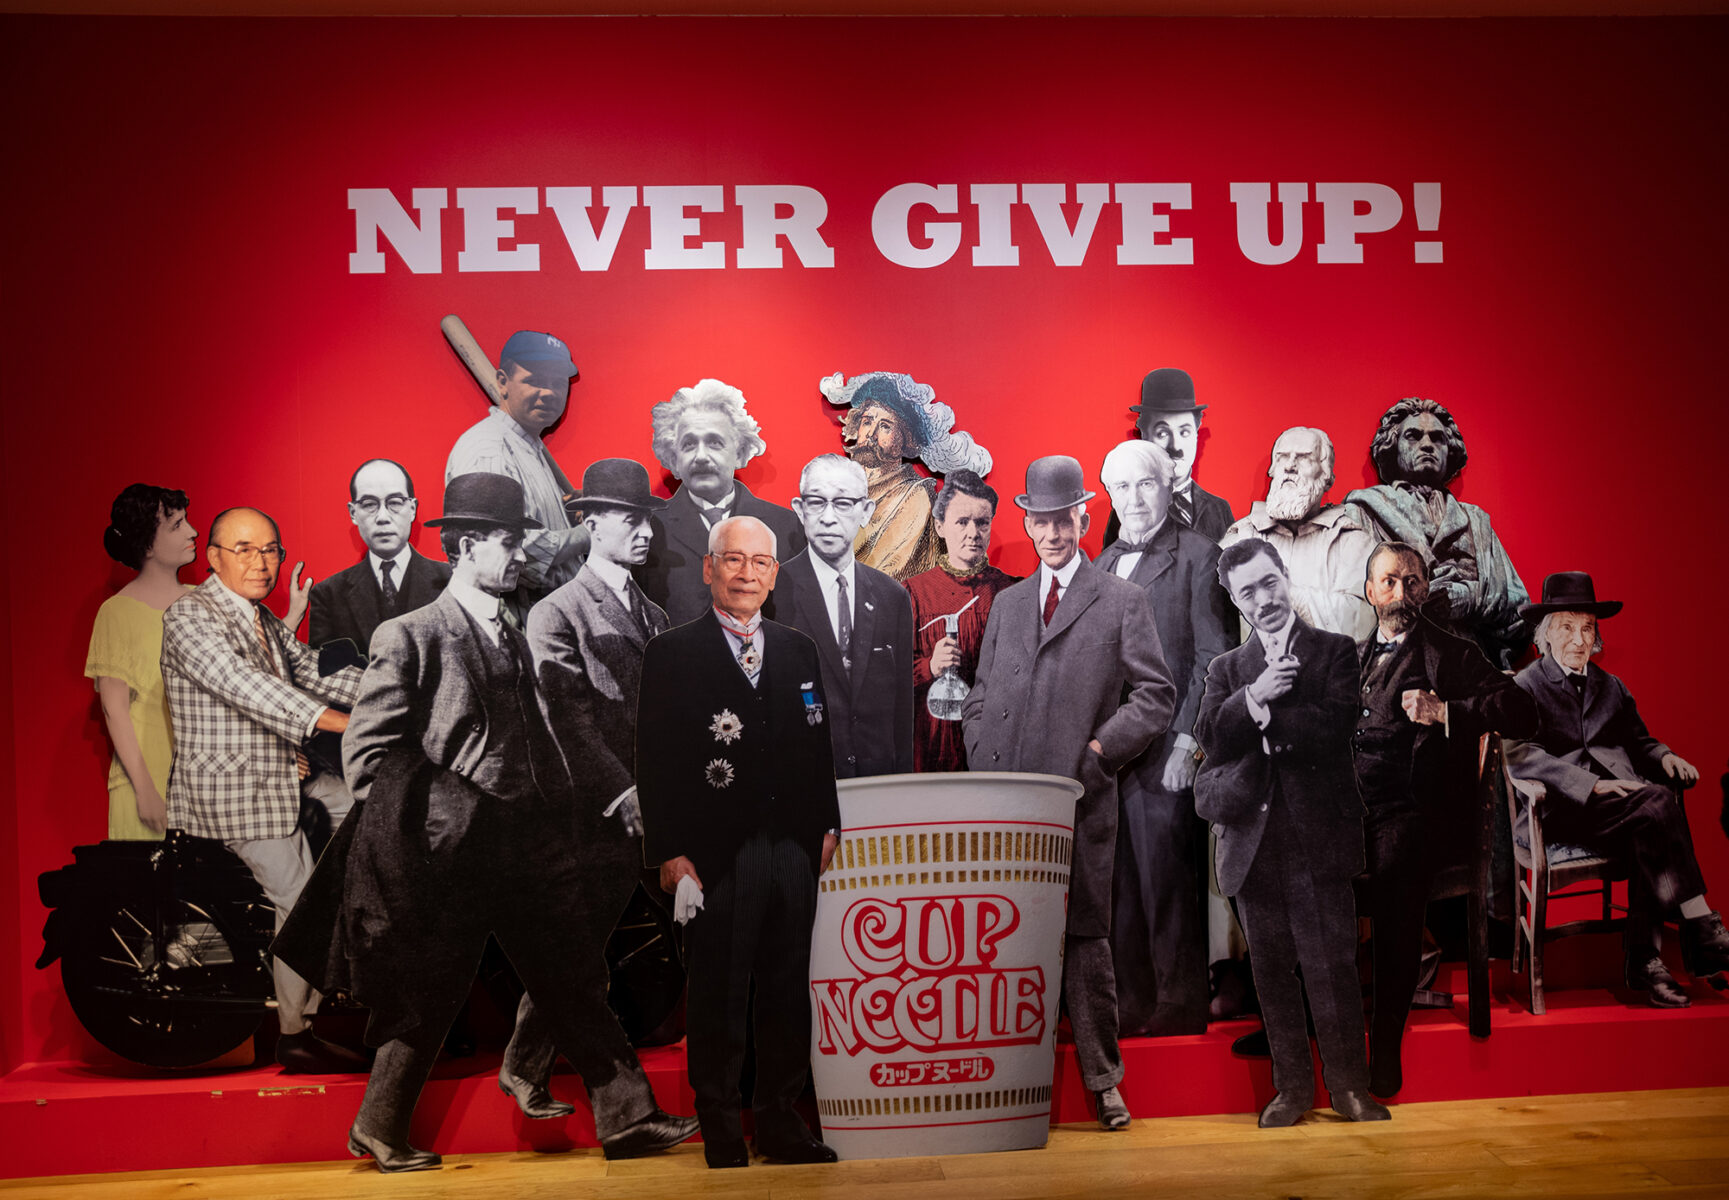 Never Give Up - CUPNOODLES